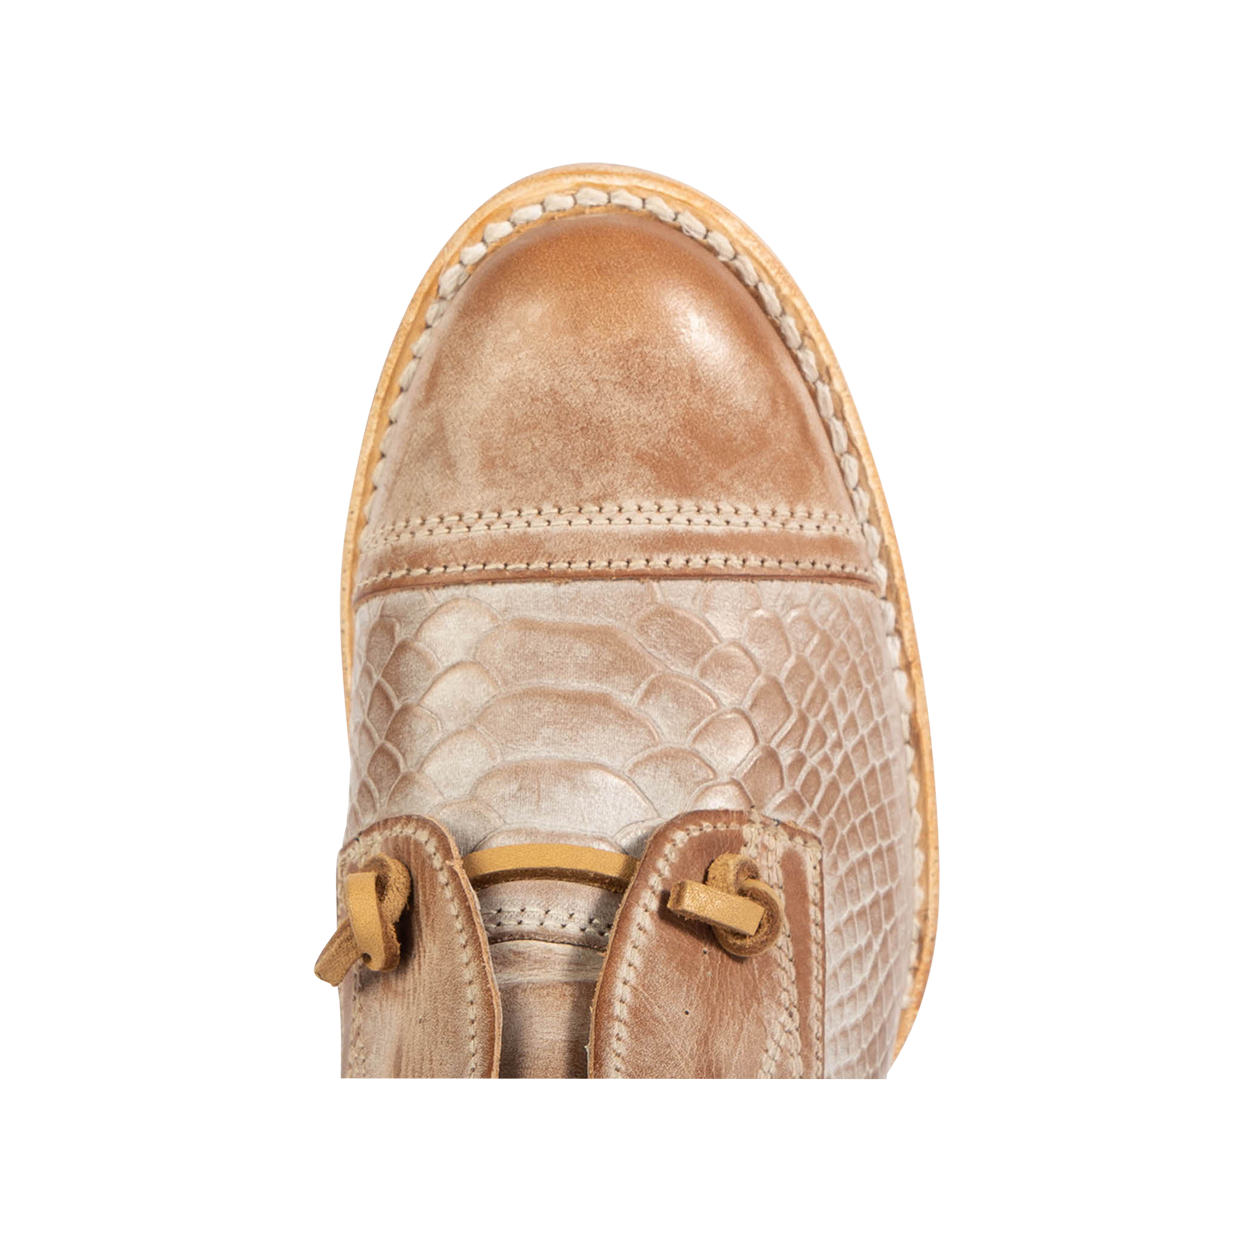 Top view showing almond toe and decorative knotted leather lace on FREEBIRD women's Mabel taupe multi shoe